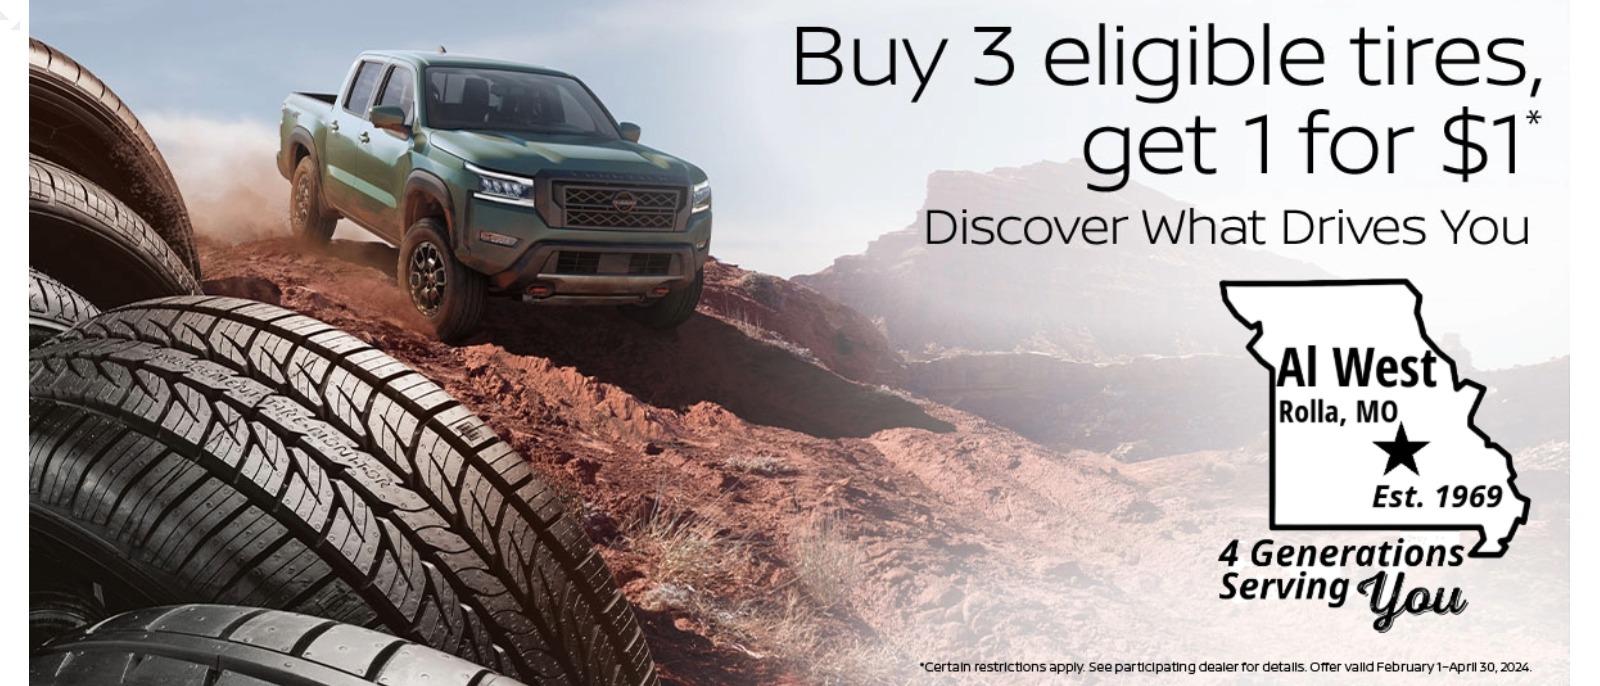 Buy 3 eligible tires, get 1 for $1*
Discover What Drives You